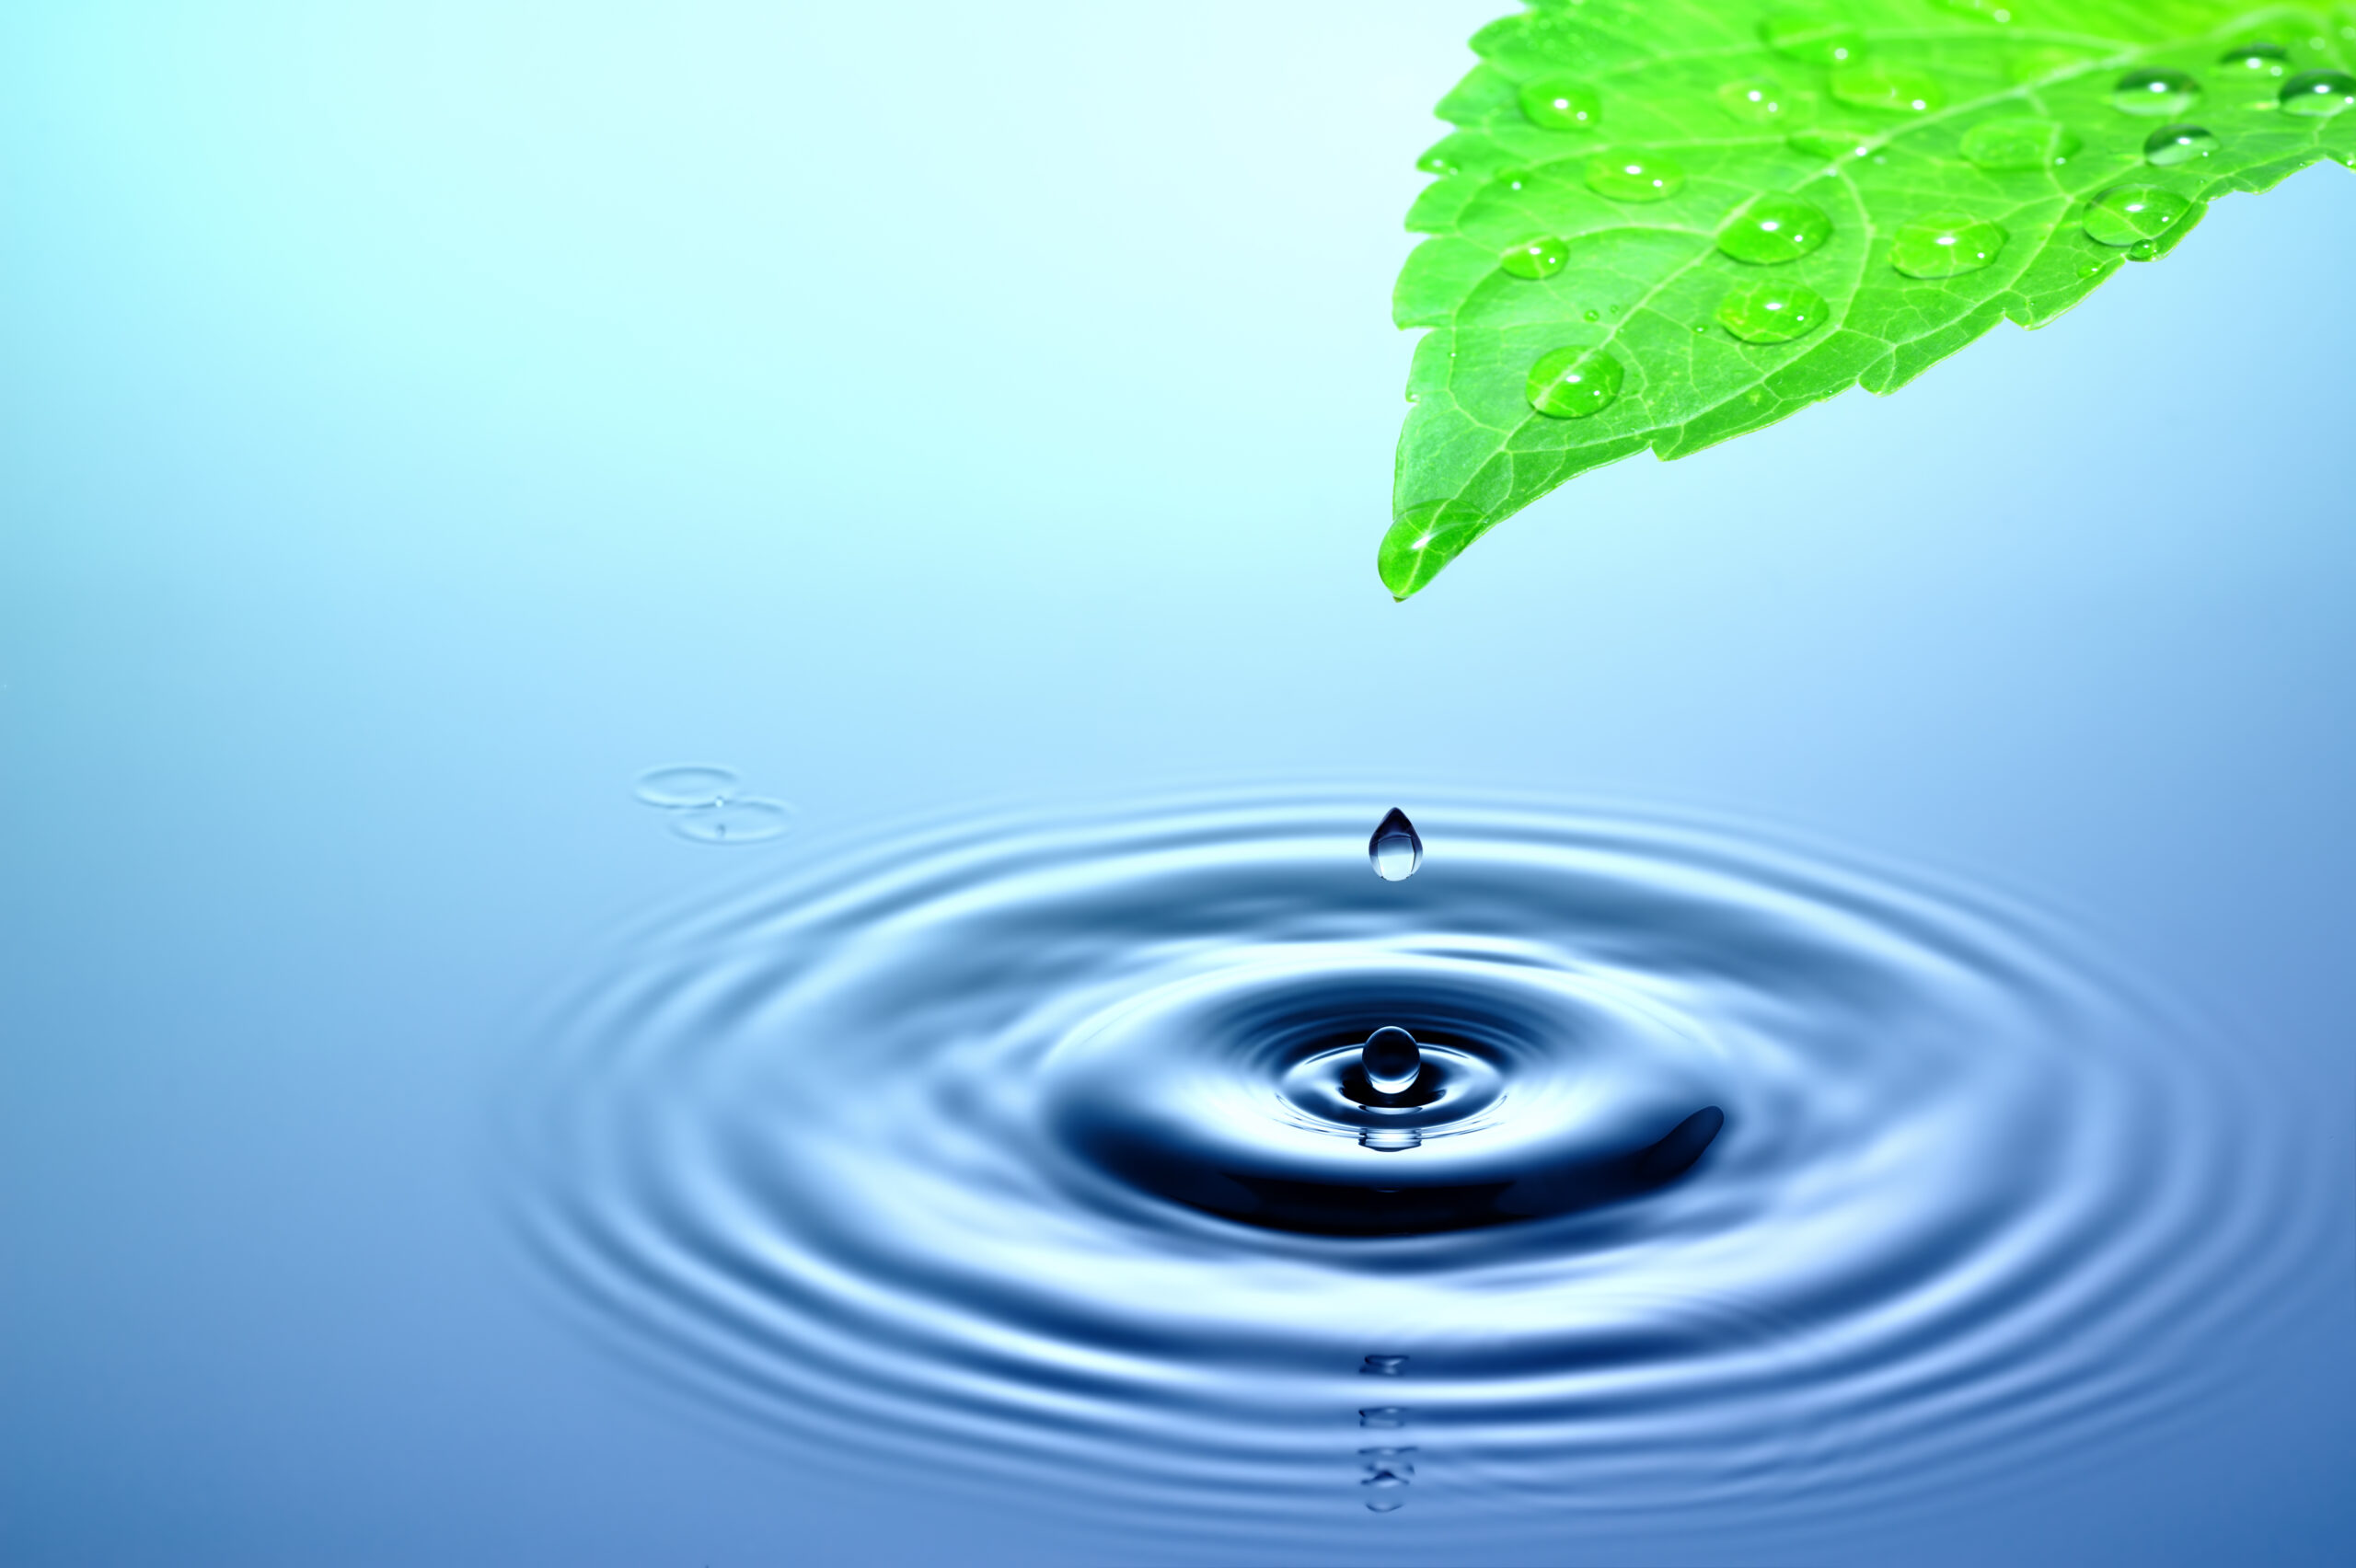 Drop,Of,Rain,Falling,From,Green,Leaf,To,Smooth,Water